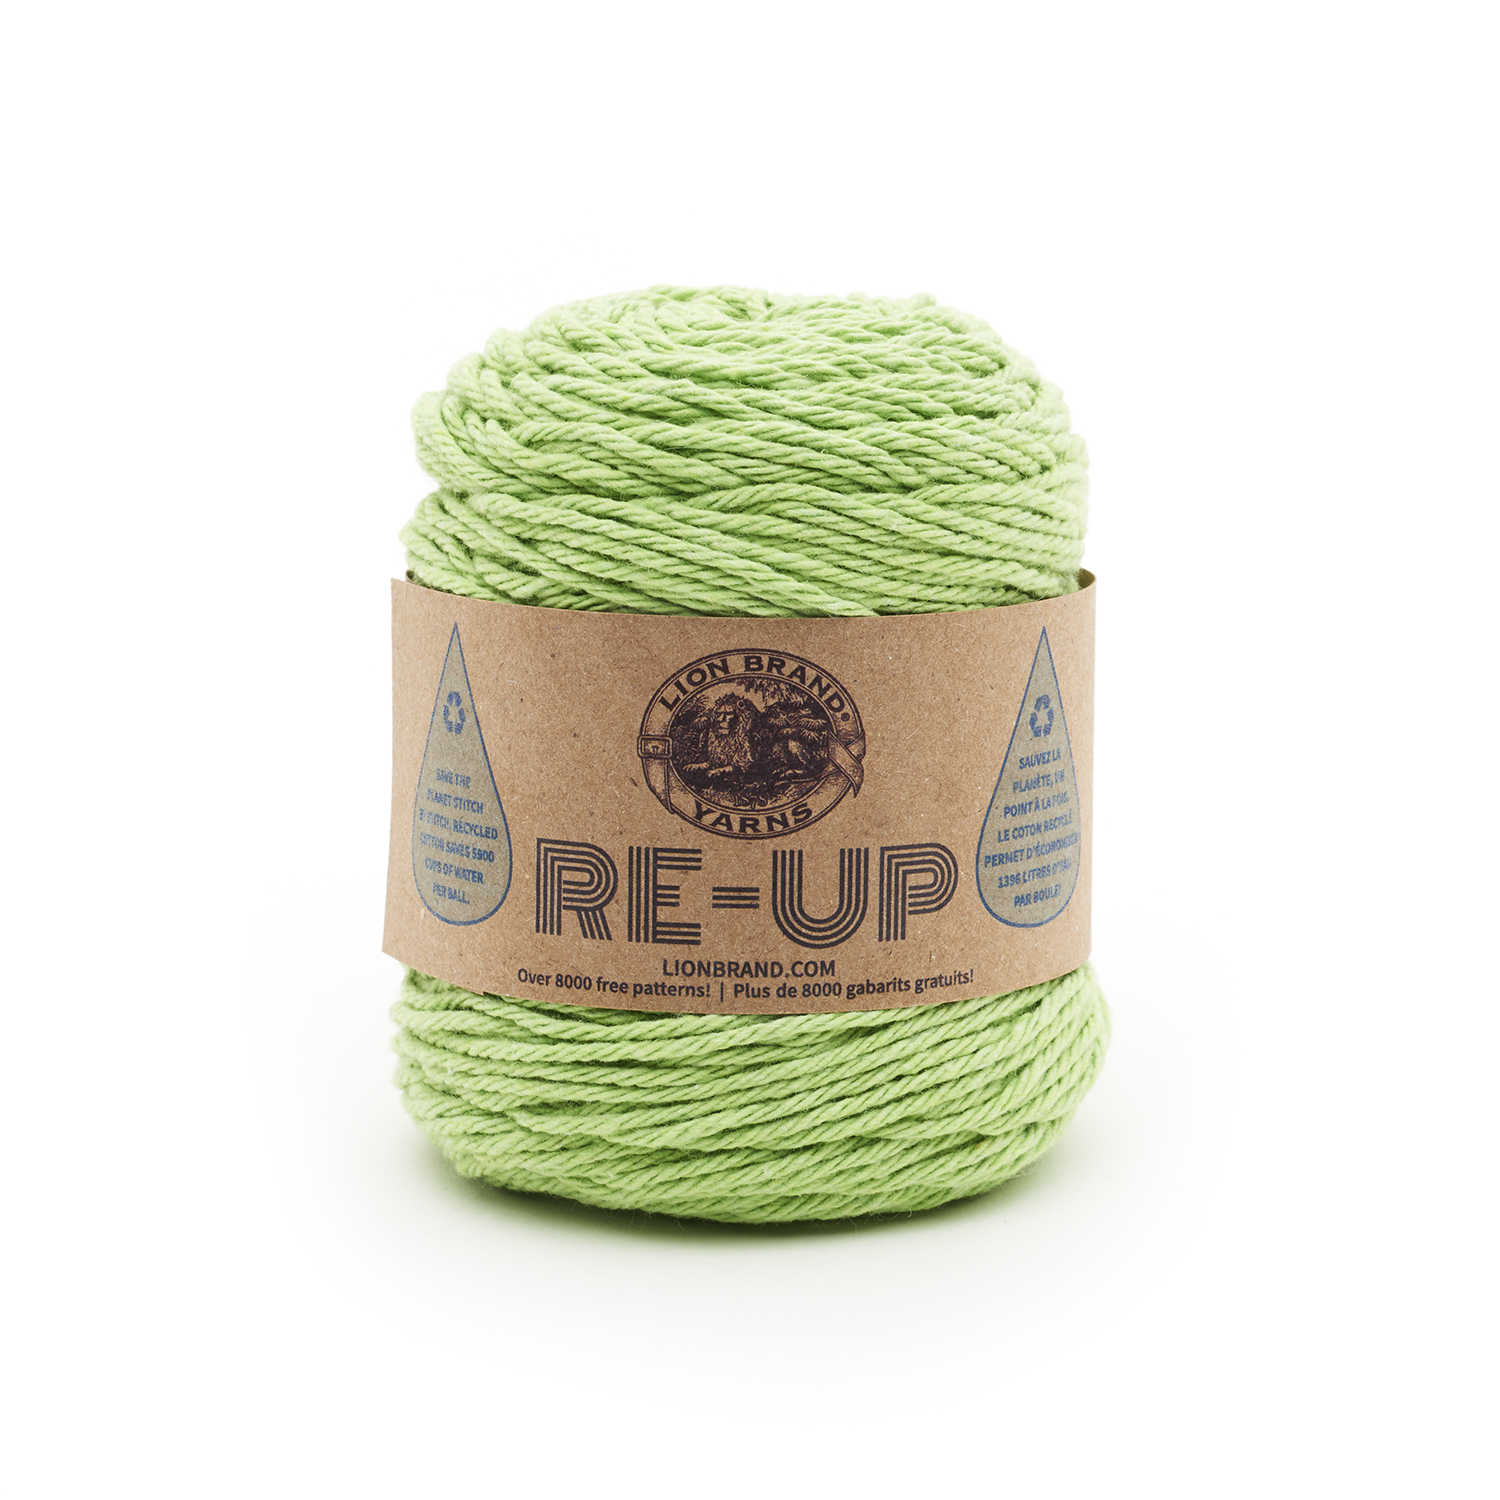 Re-Up Yarn in Lime